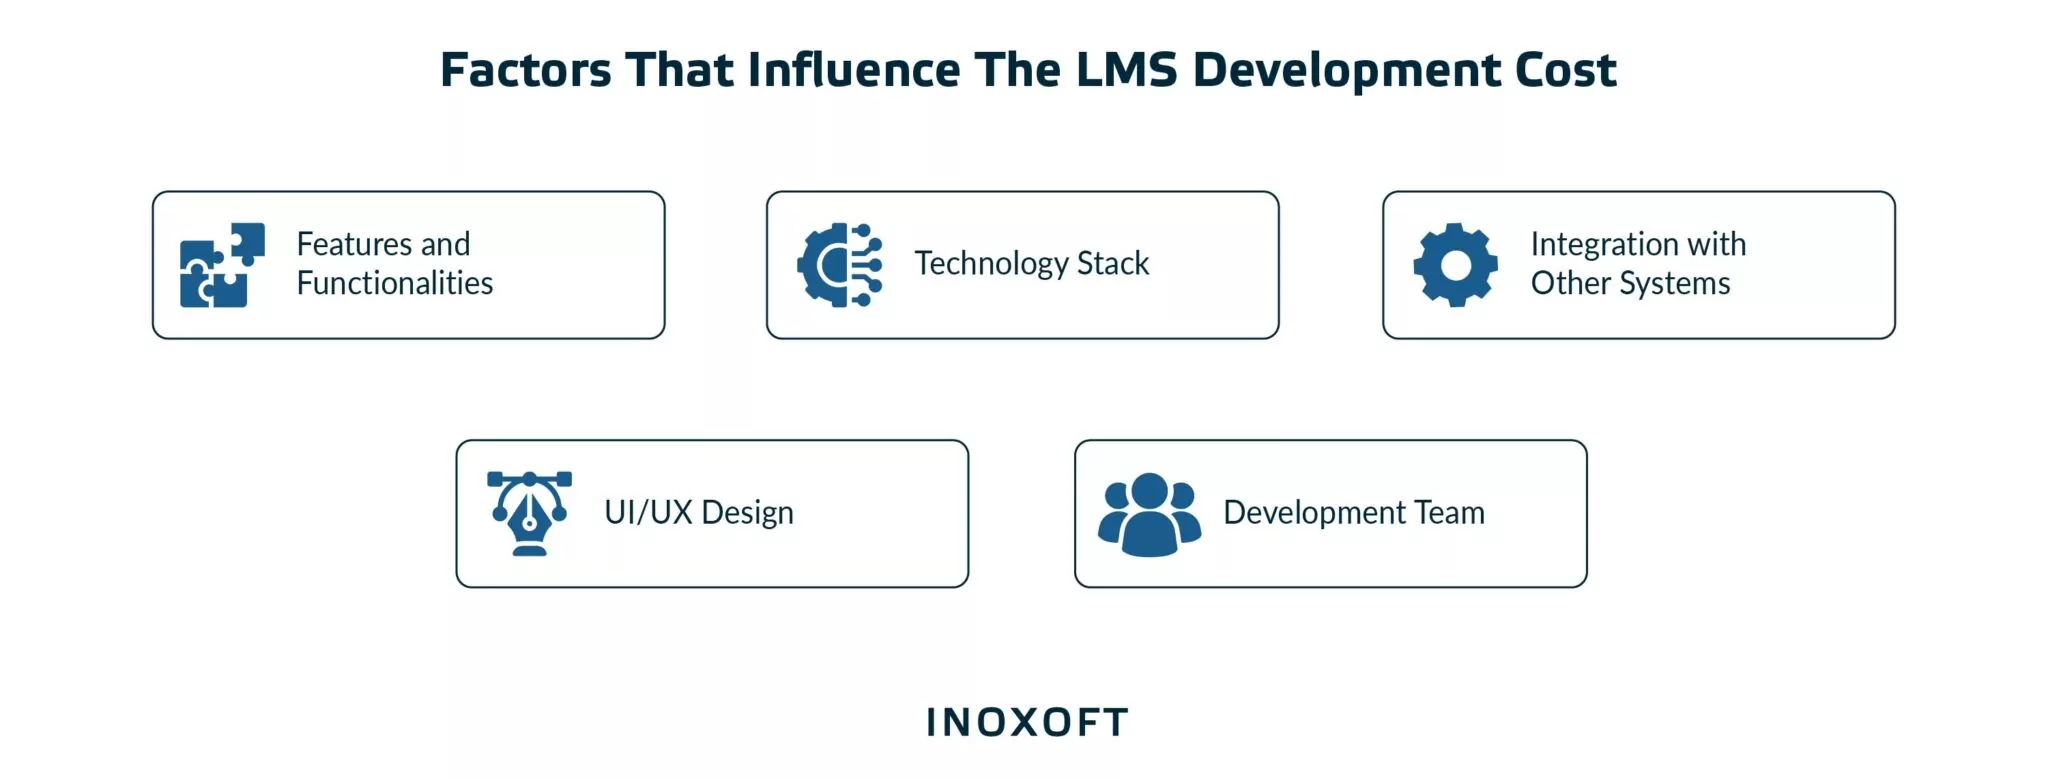 Factors that Influence the LMS Development Cost